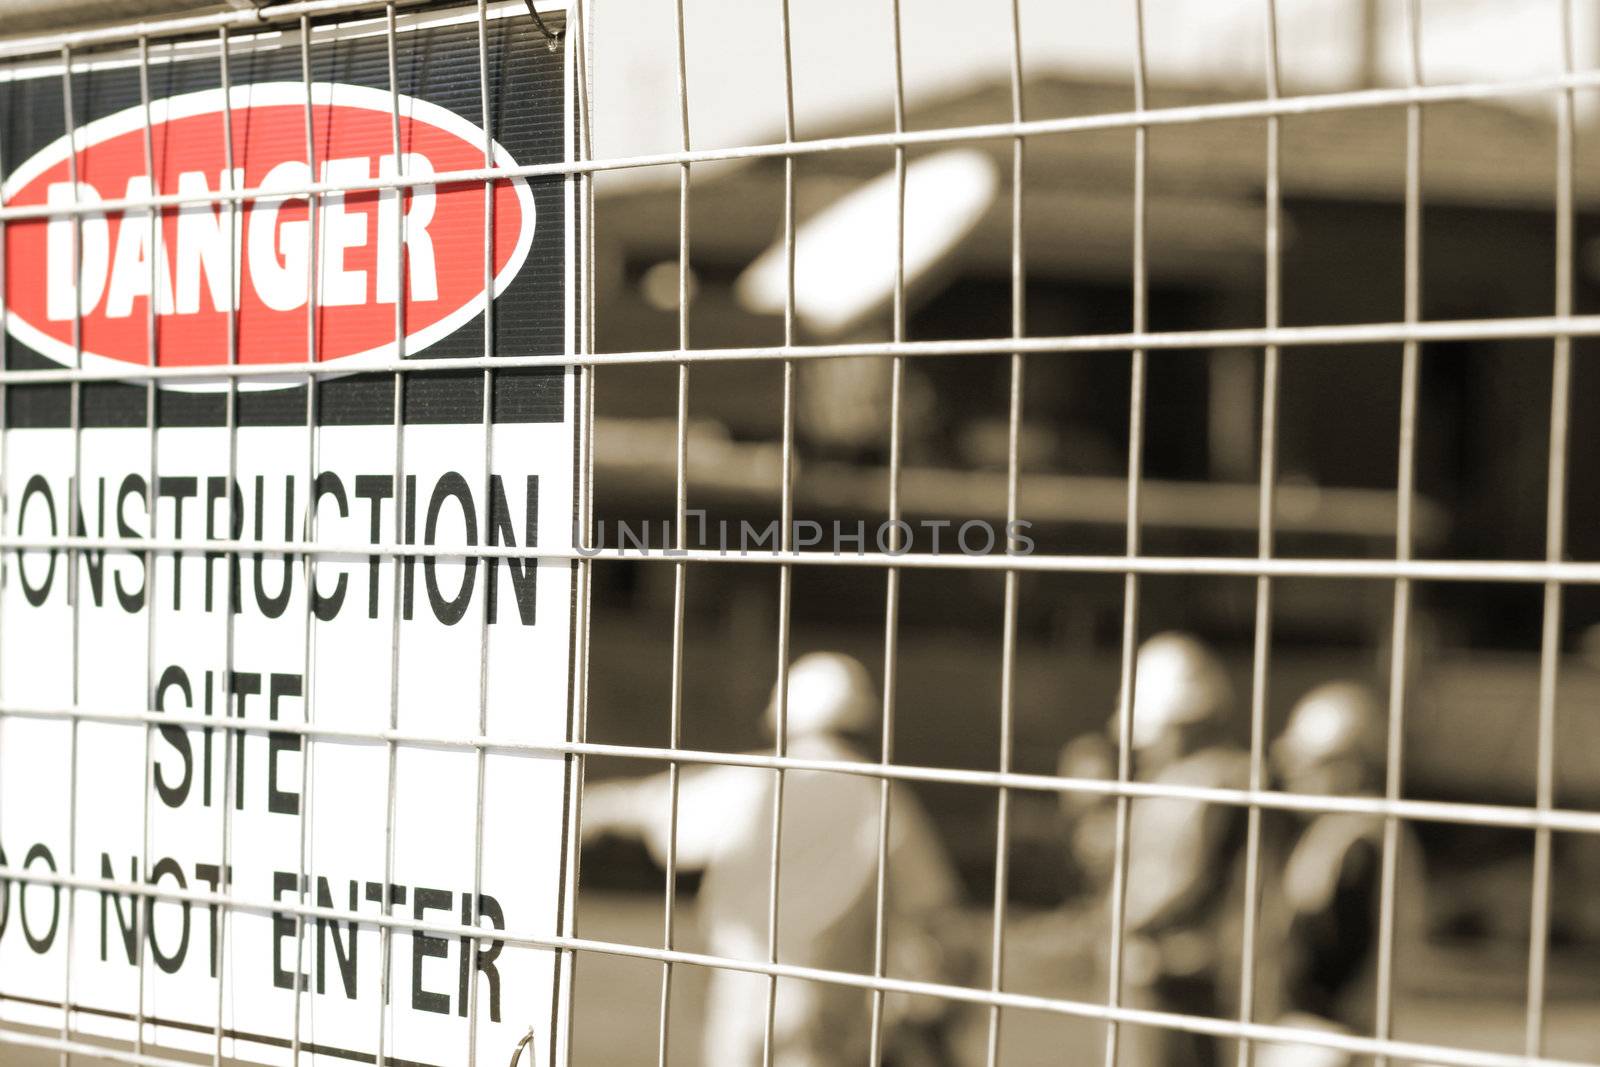 Signage and construction workers by lovleah